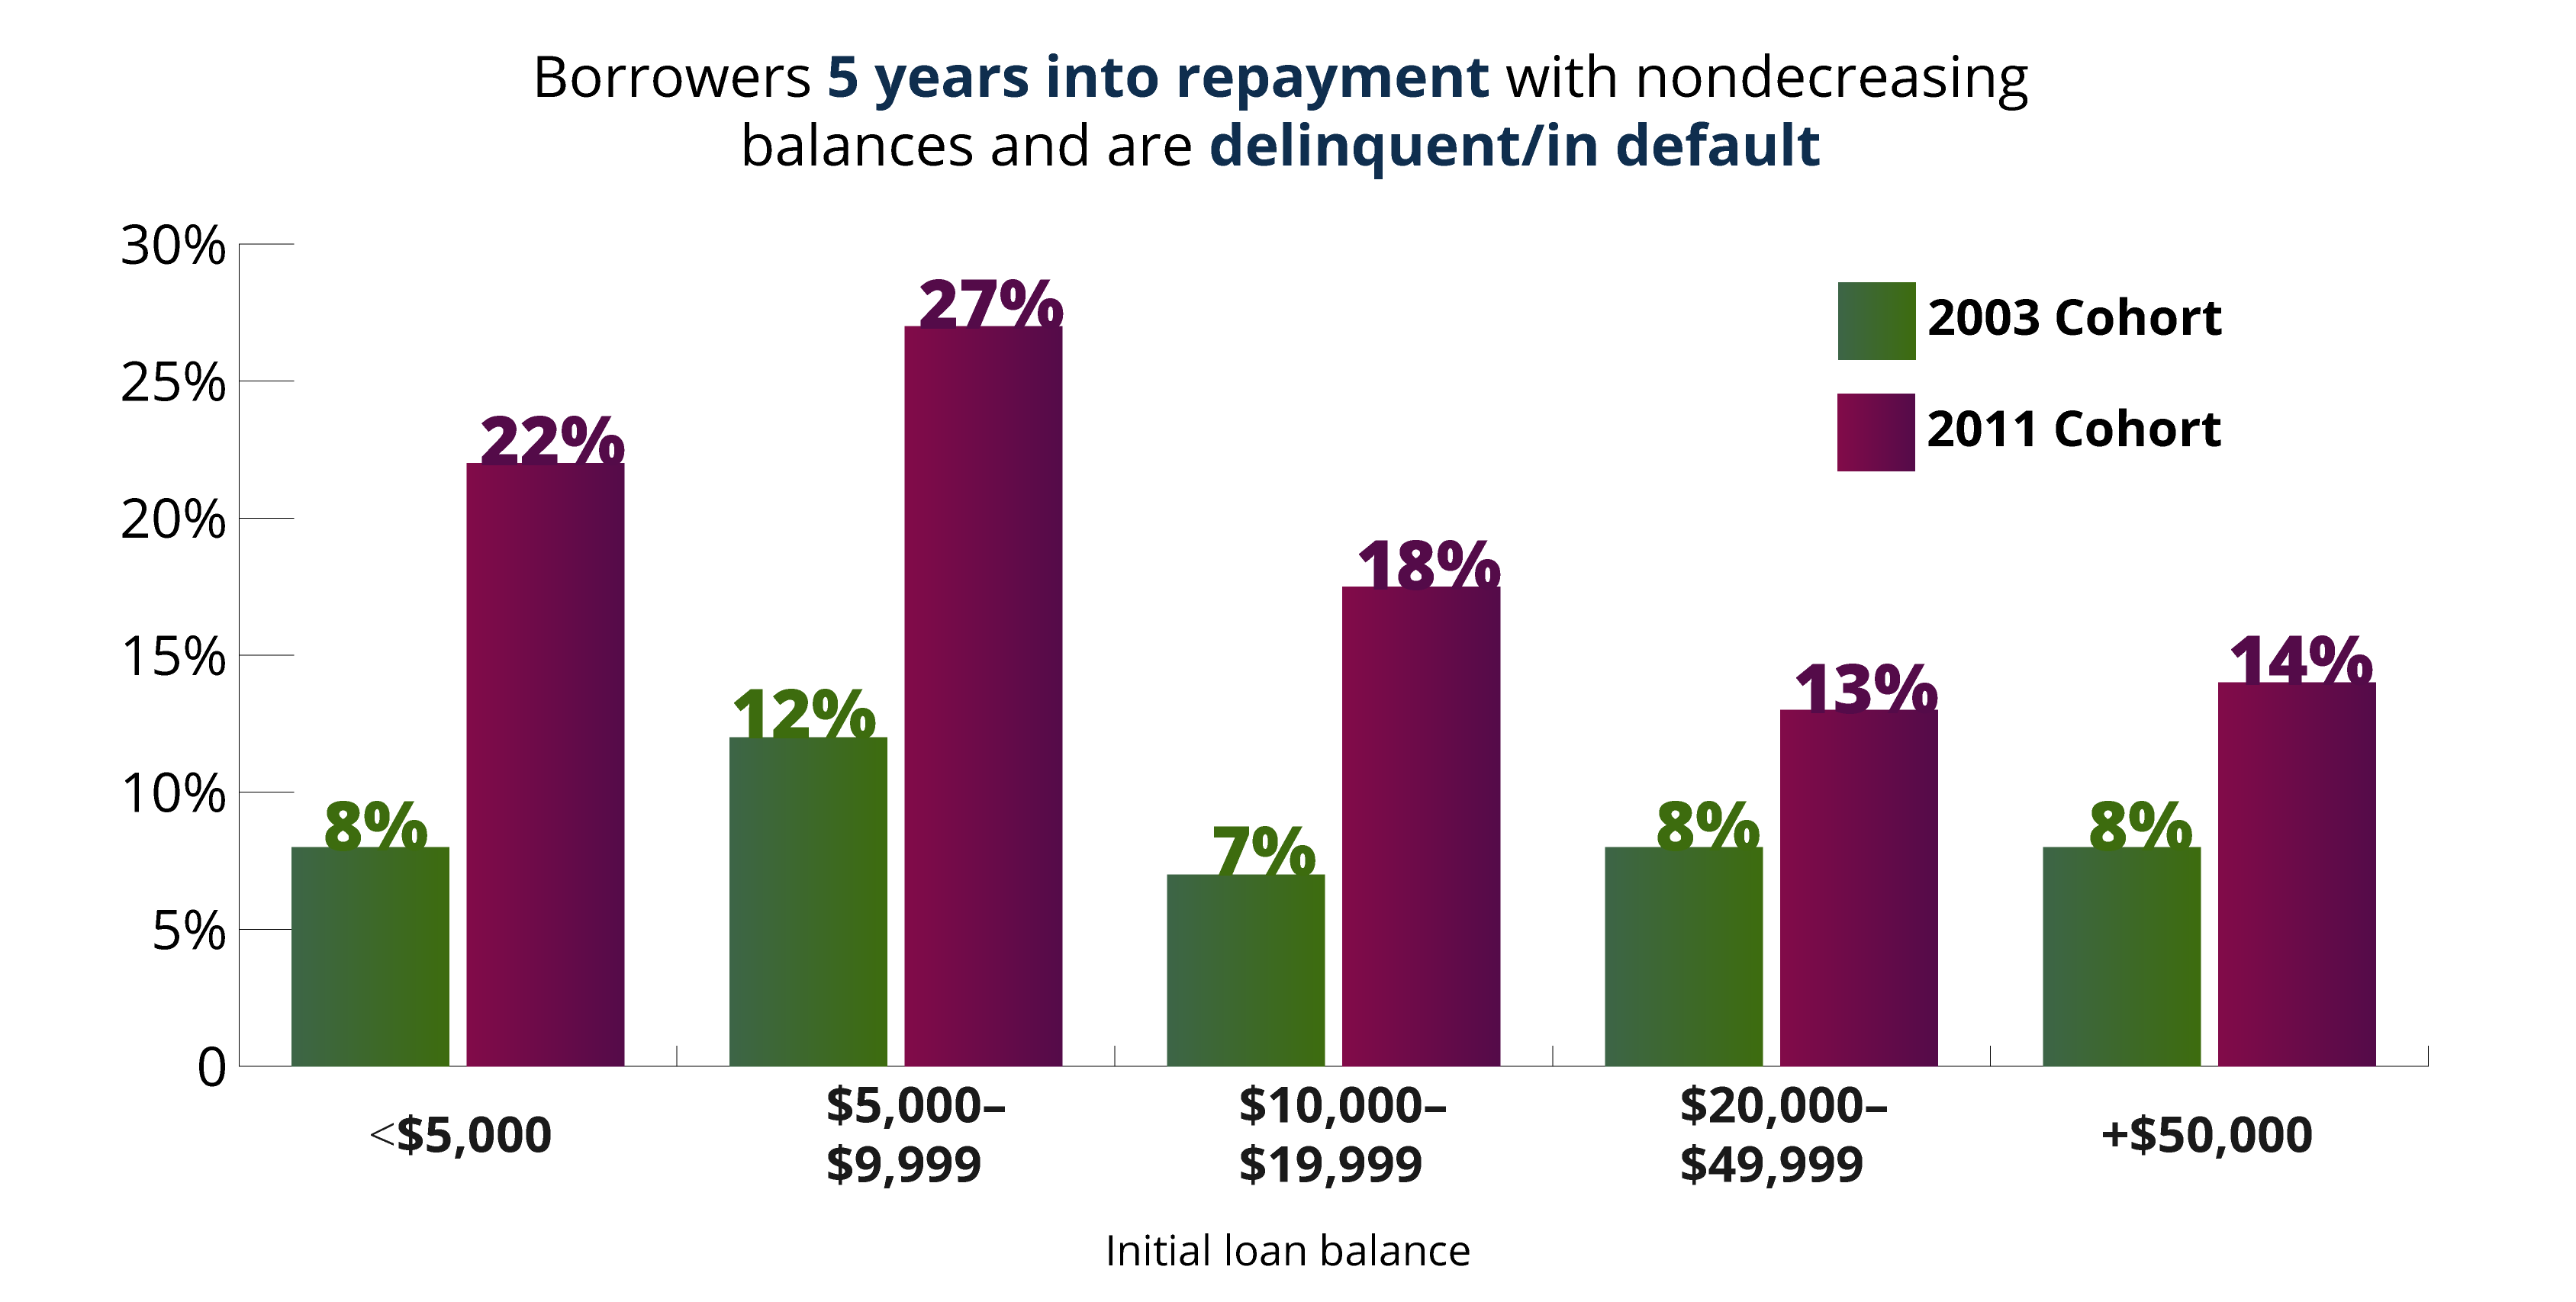 delinquent and in default borrowers 5 years into repayment 2003 vs. 2011